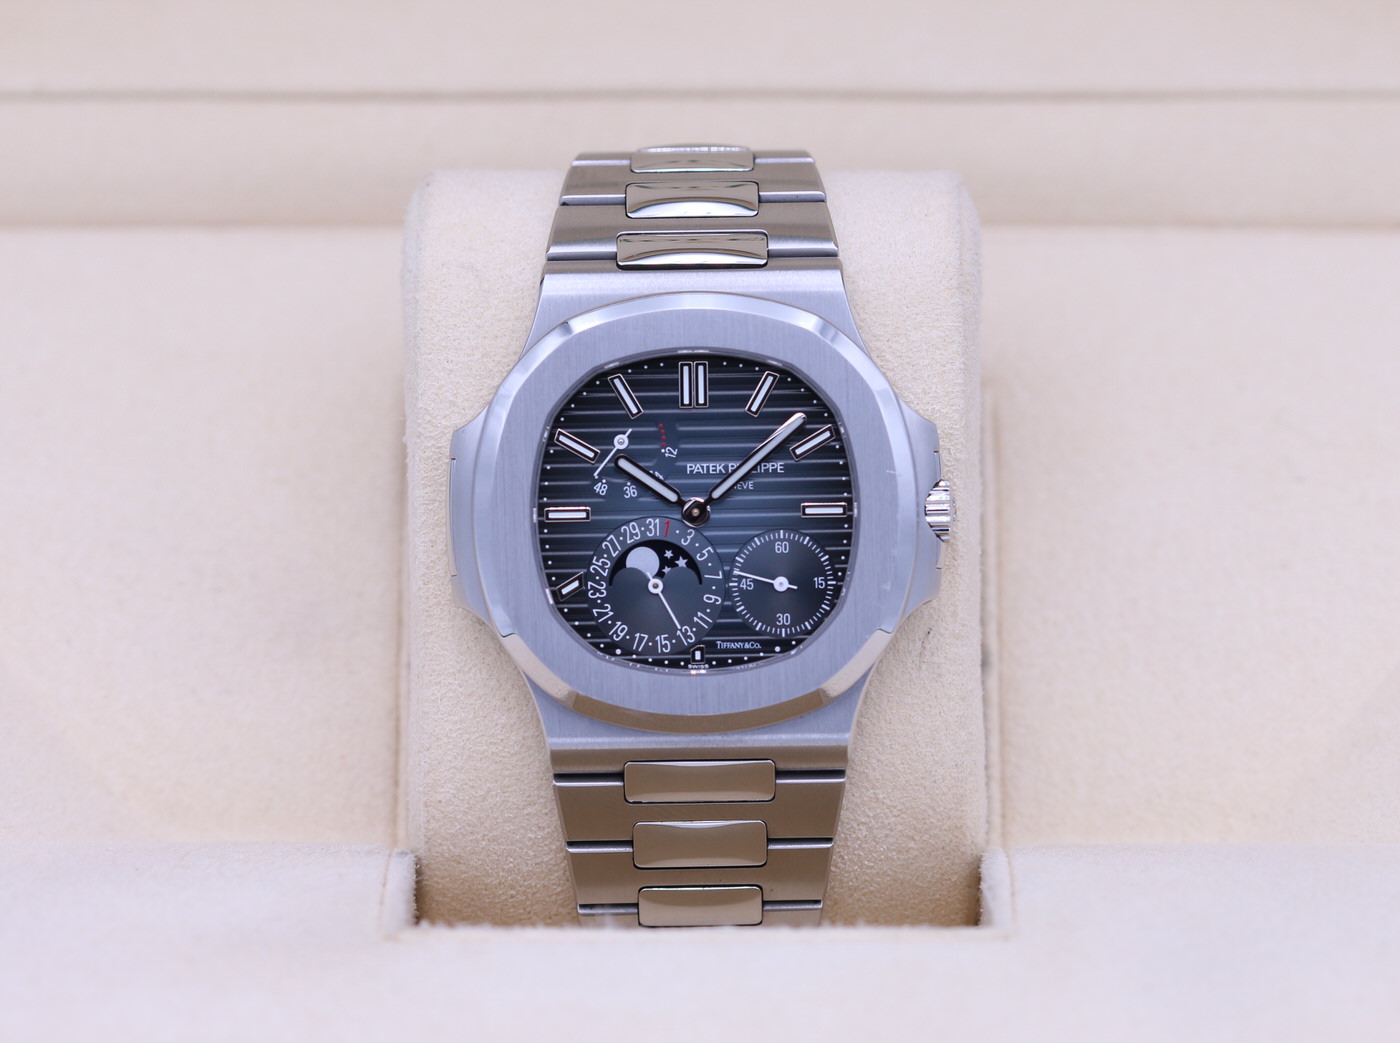 Patek Philippe Tiffany-dialed Nautilus sells at auction for $3.25